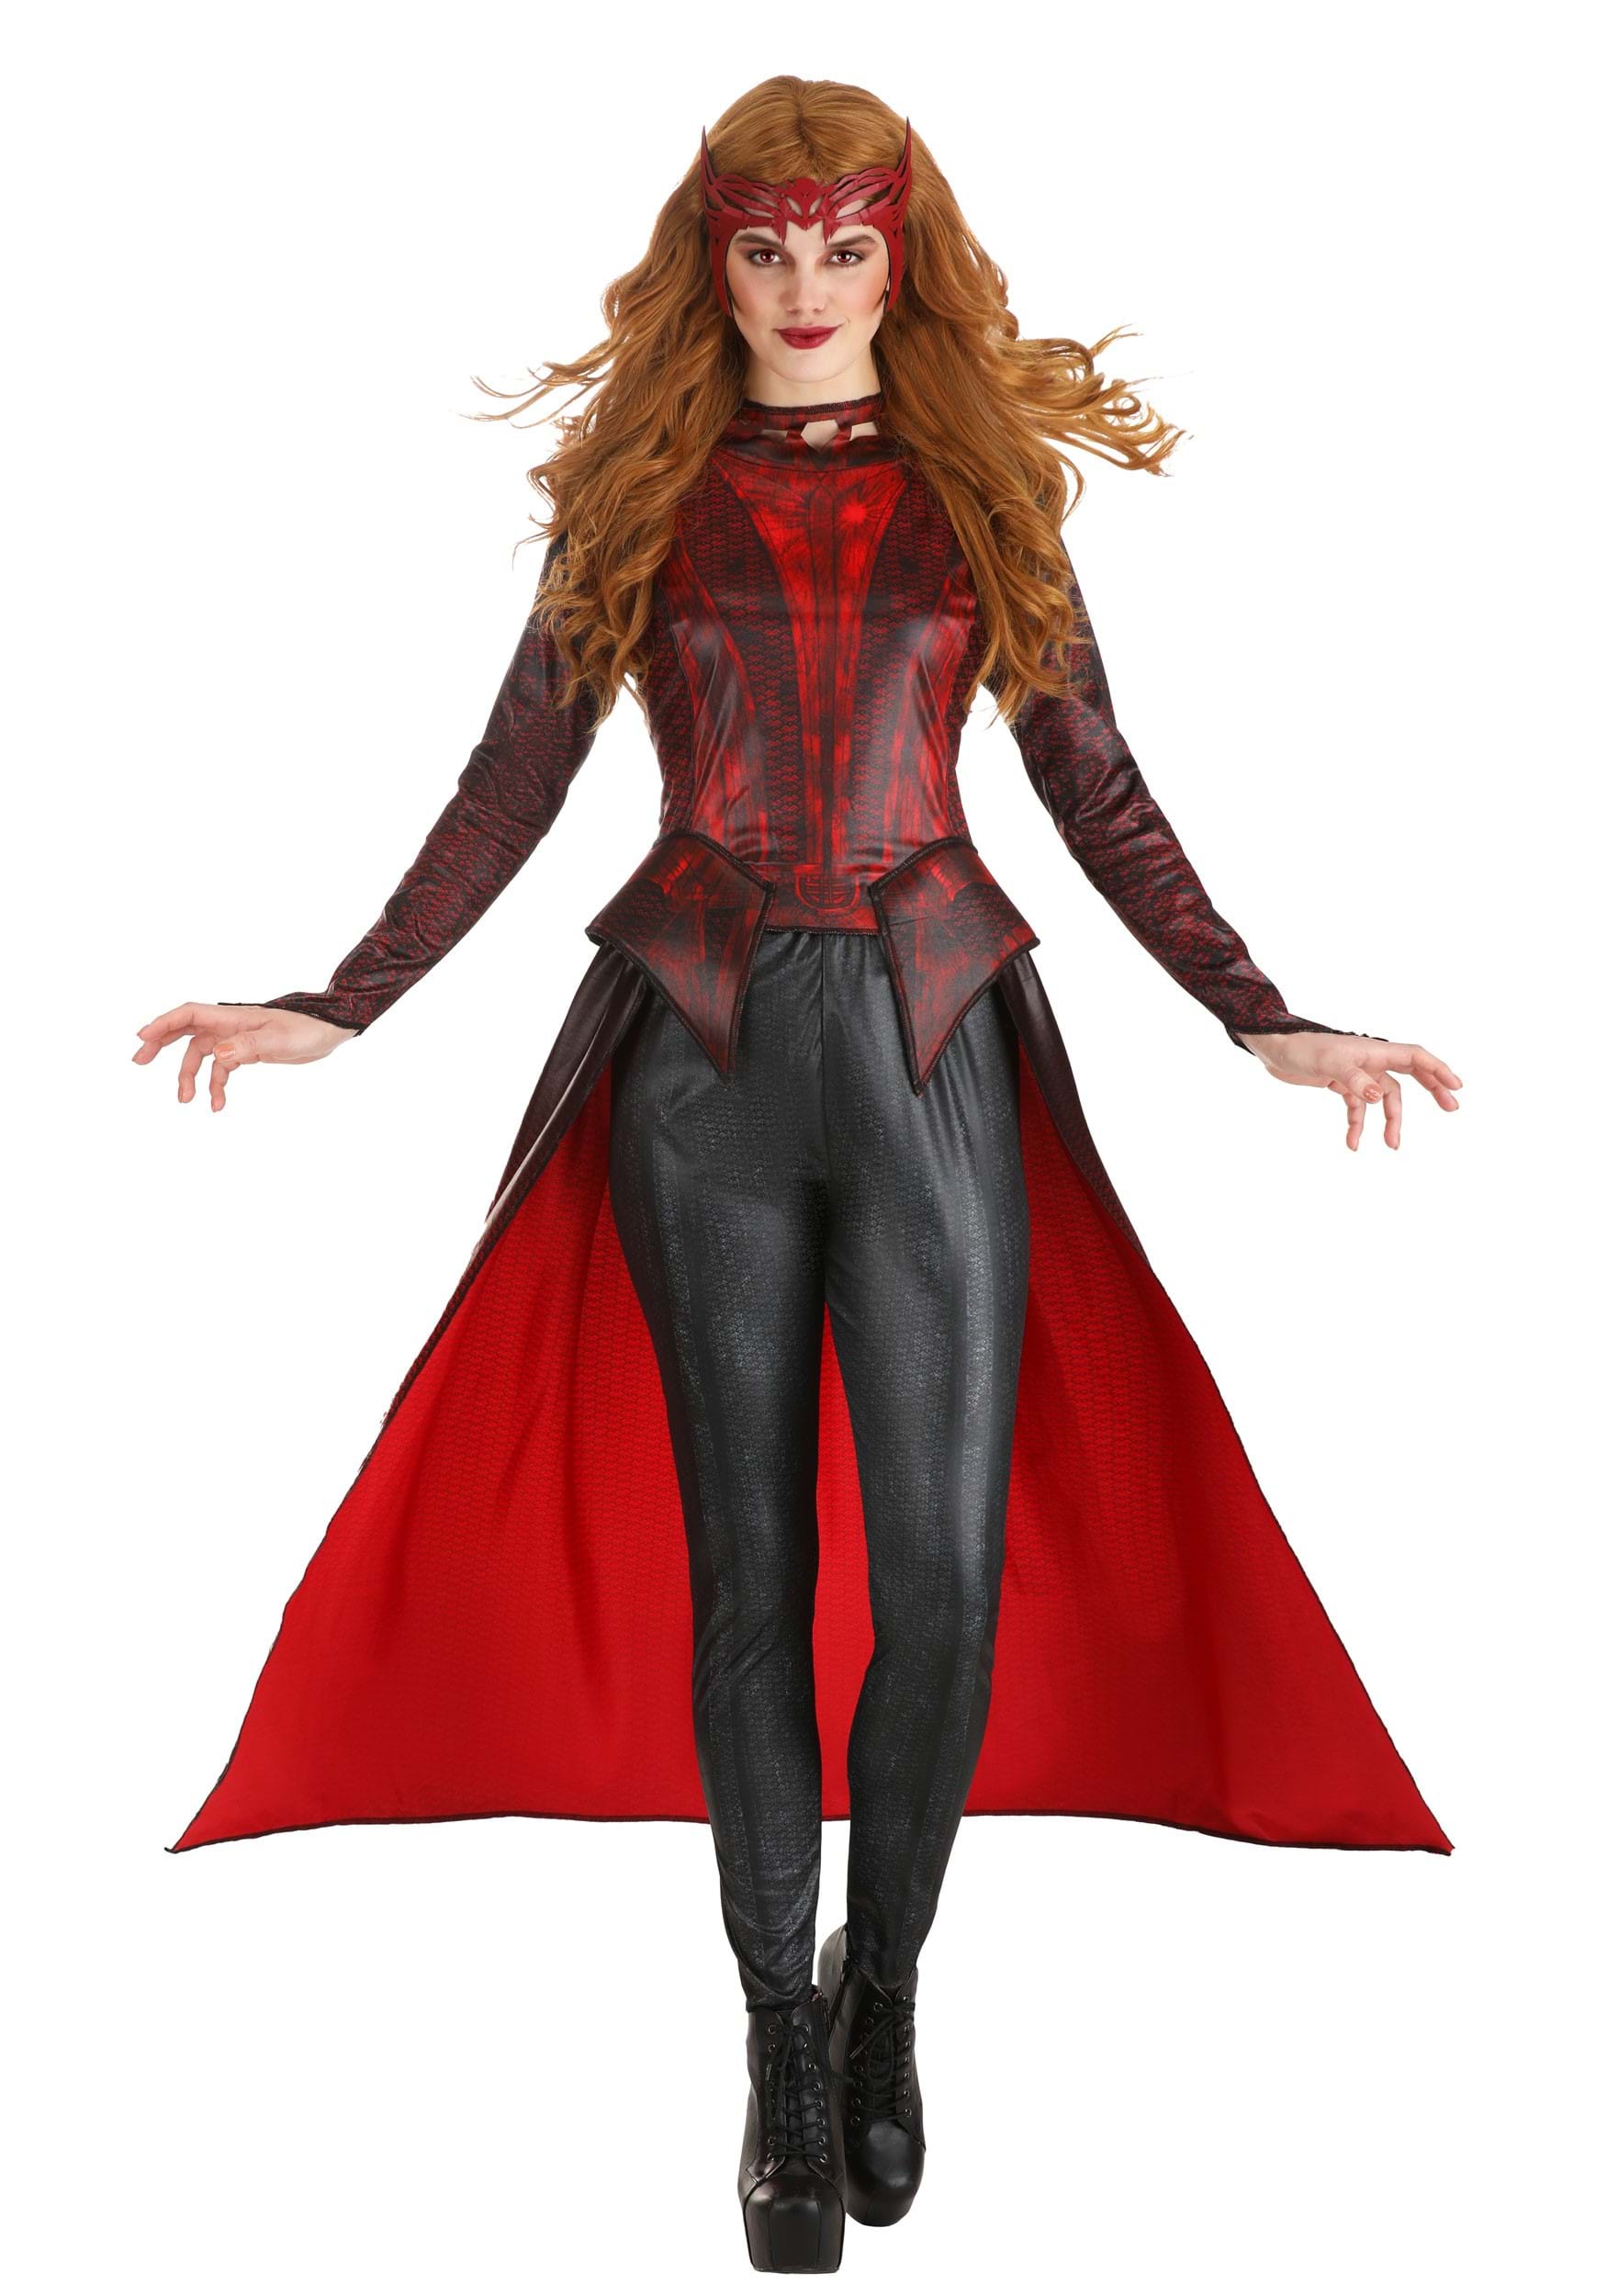 Photos - Fancy Dress Jazwares Scarlet Witch Hero Costume for Women Red/Gray JWC1030 